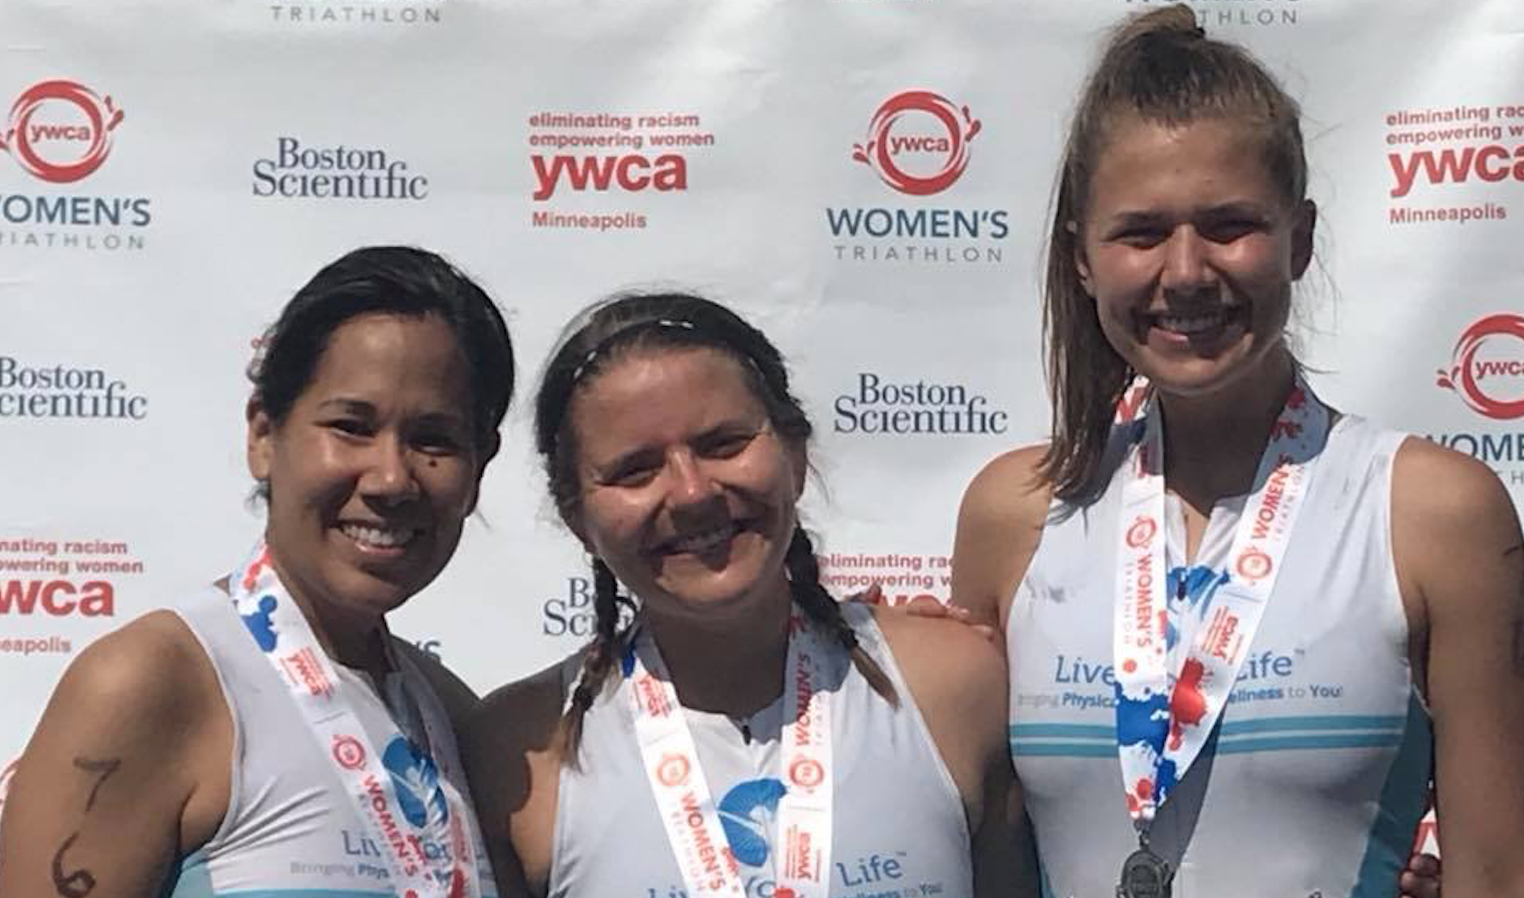 Live Your Life at the YWCA Triathlon